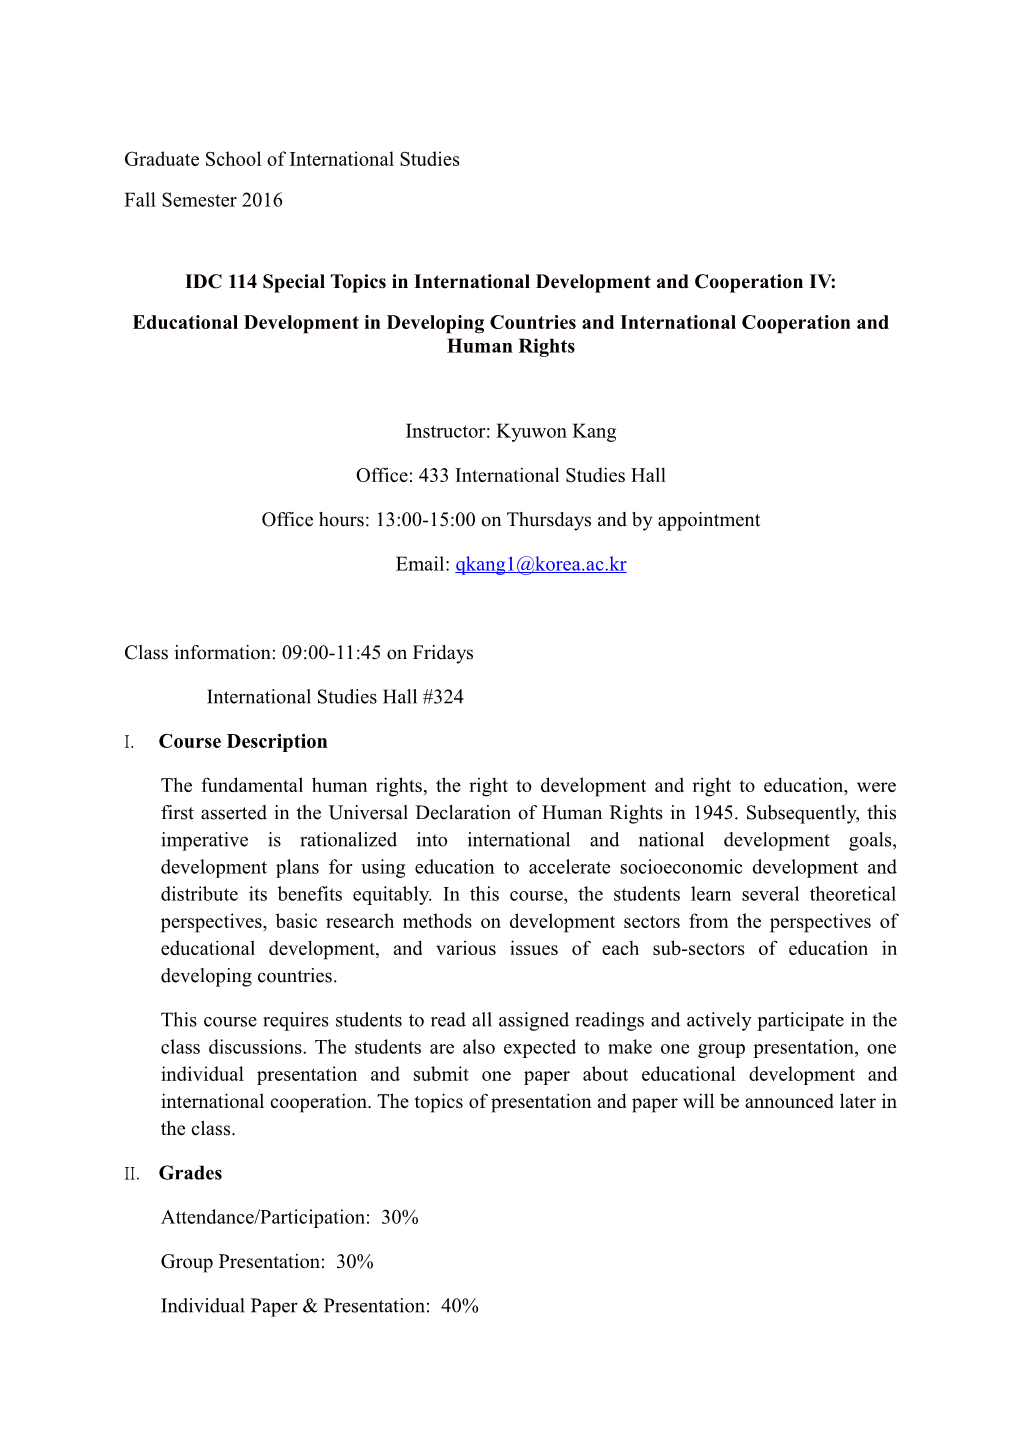 IDC 114 Special Topics in International Development and Cooperation IV